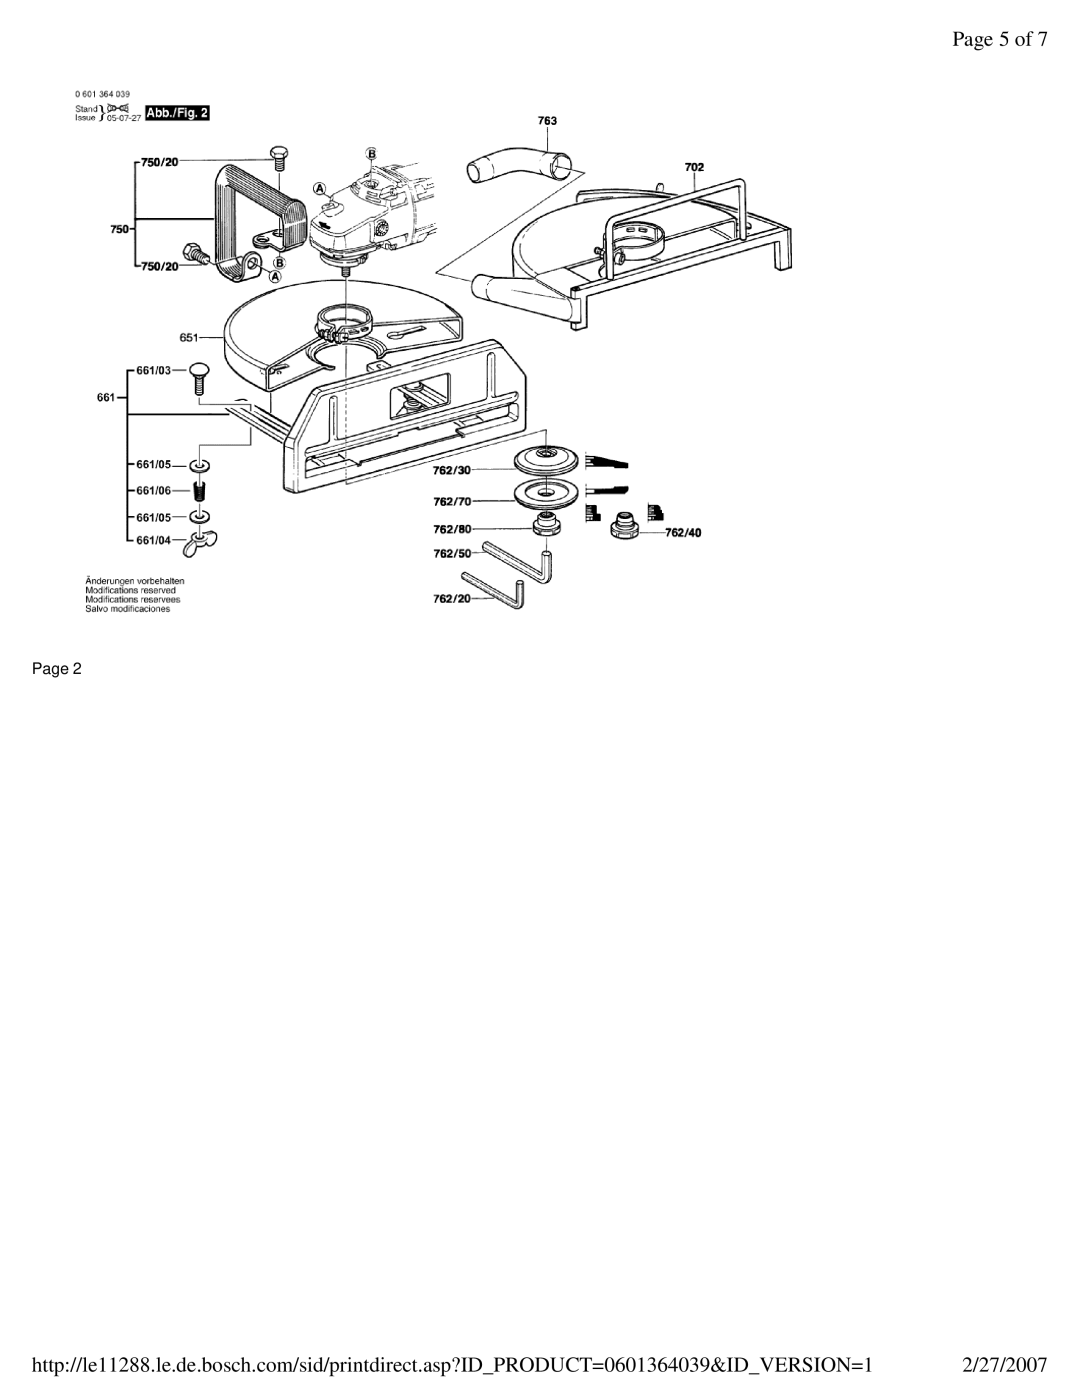 Bosch Appliances 1364 manual Page 5 of 